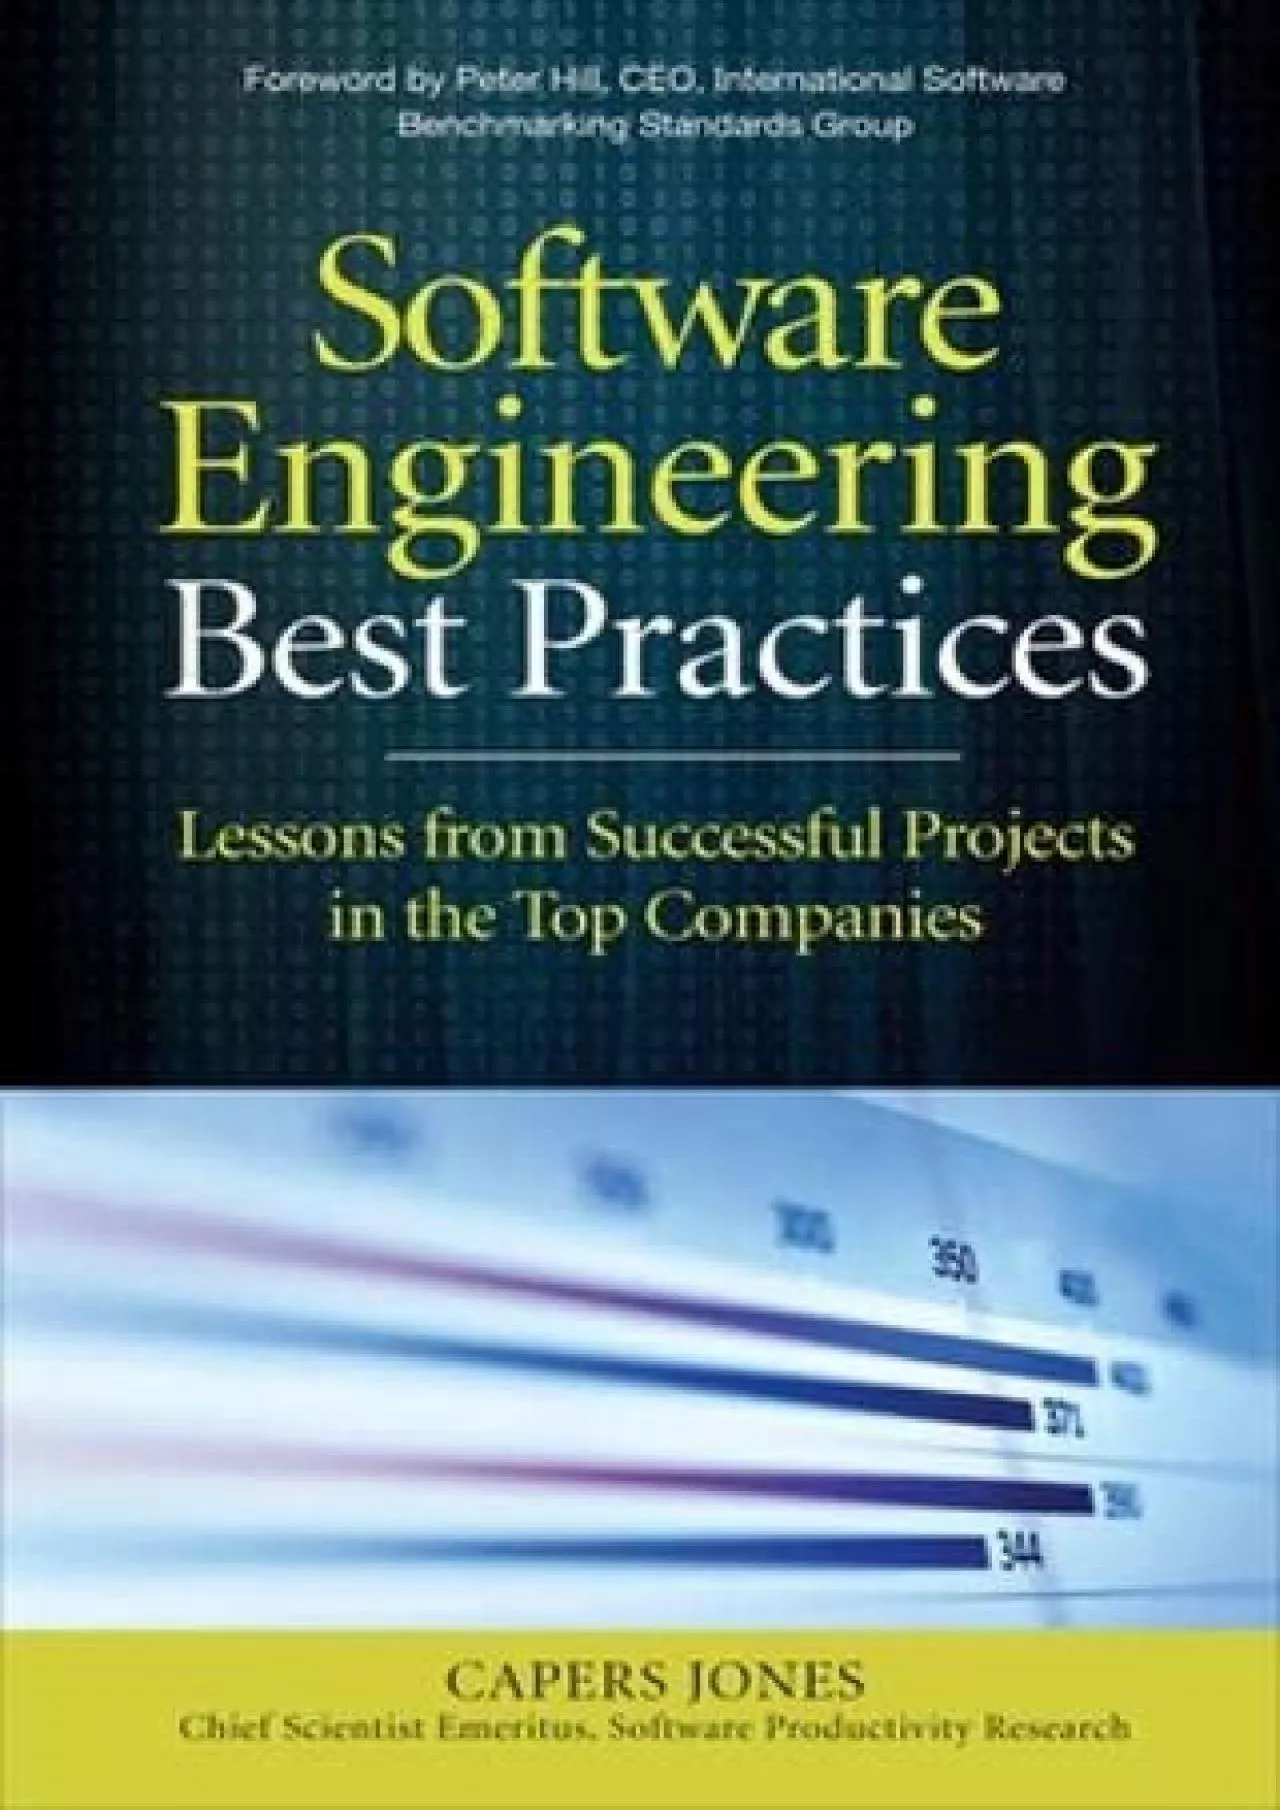 [READING BOOK]-Software Engineering Best Practices: Lessons from Successful Projects in